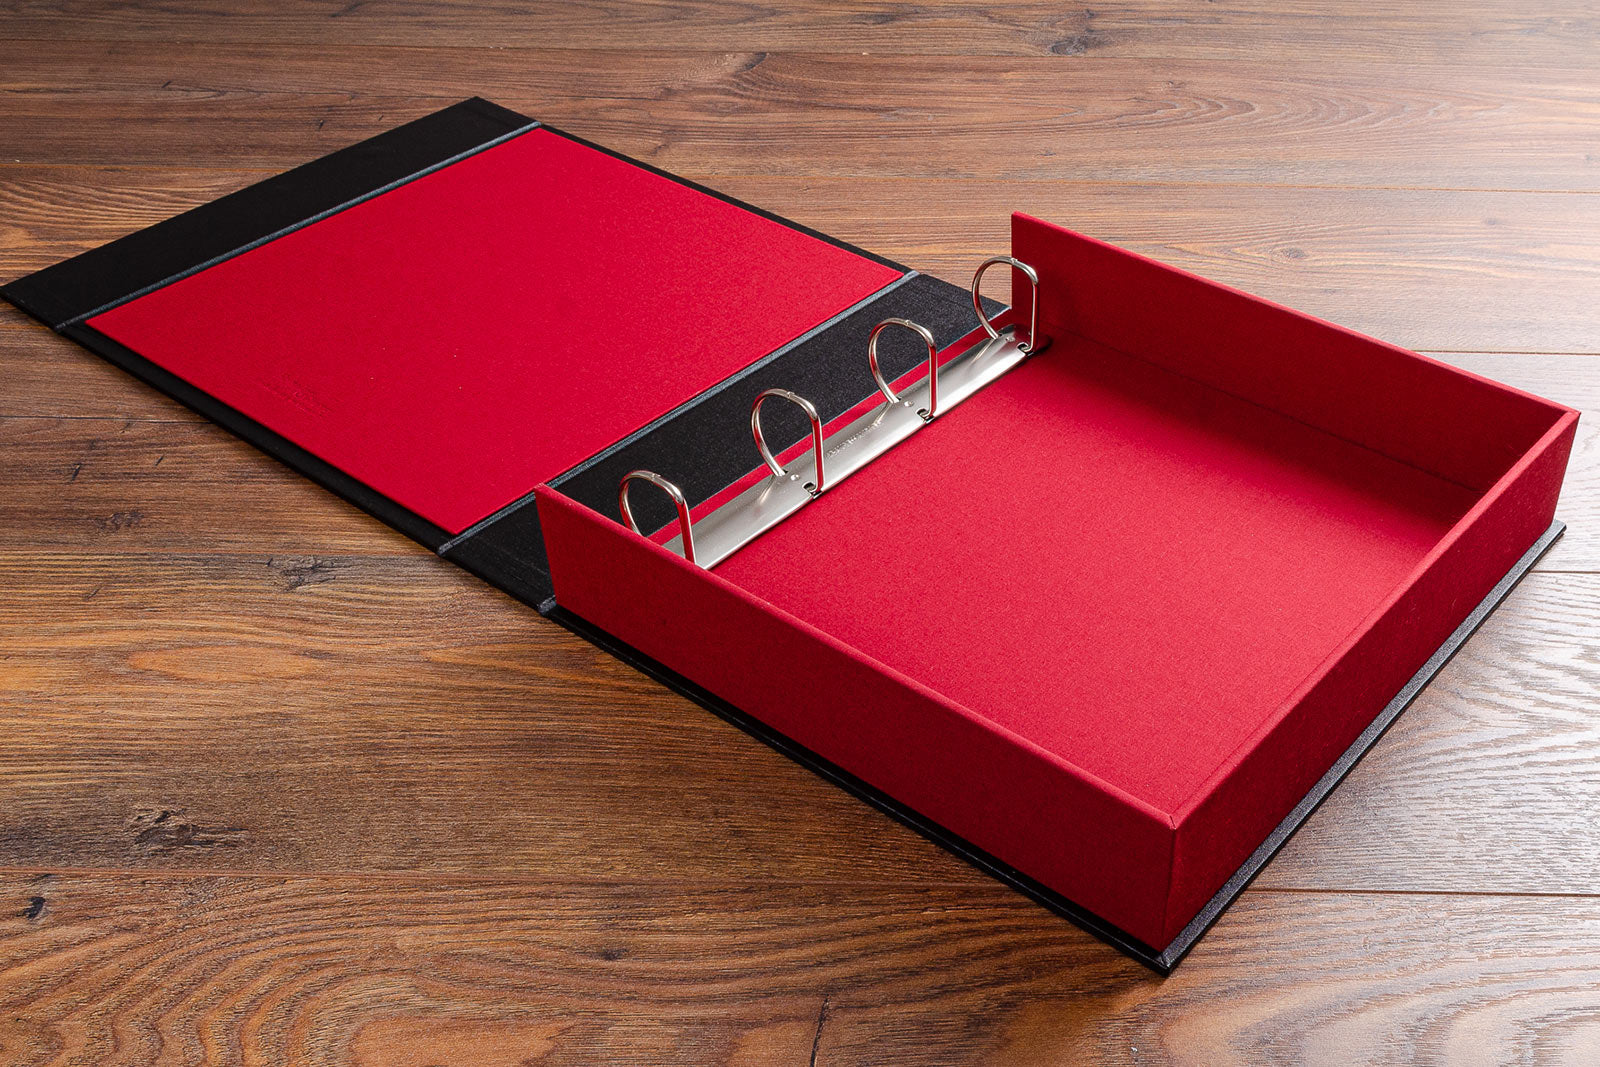 Vehicle document box file in black buckram with gold foil embossing on the cover with Jaguar E Type details